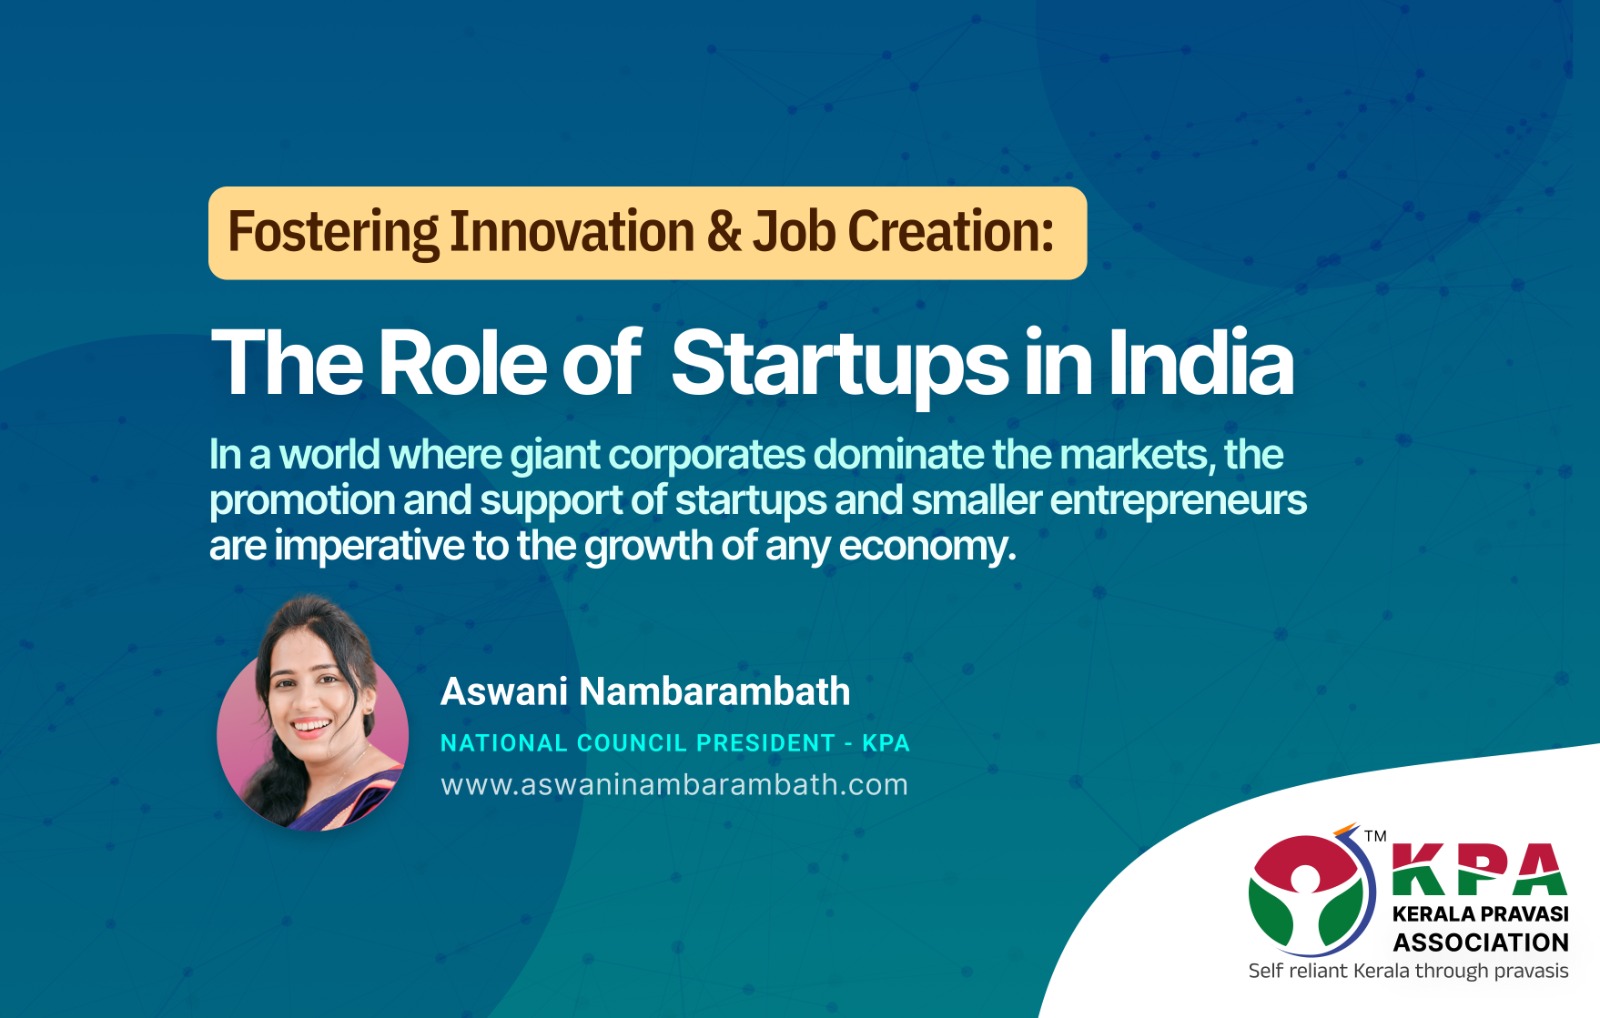 Fostering Innovation and Job Creation: The Role of Startups in India